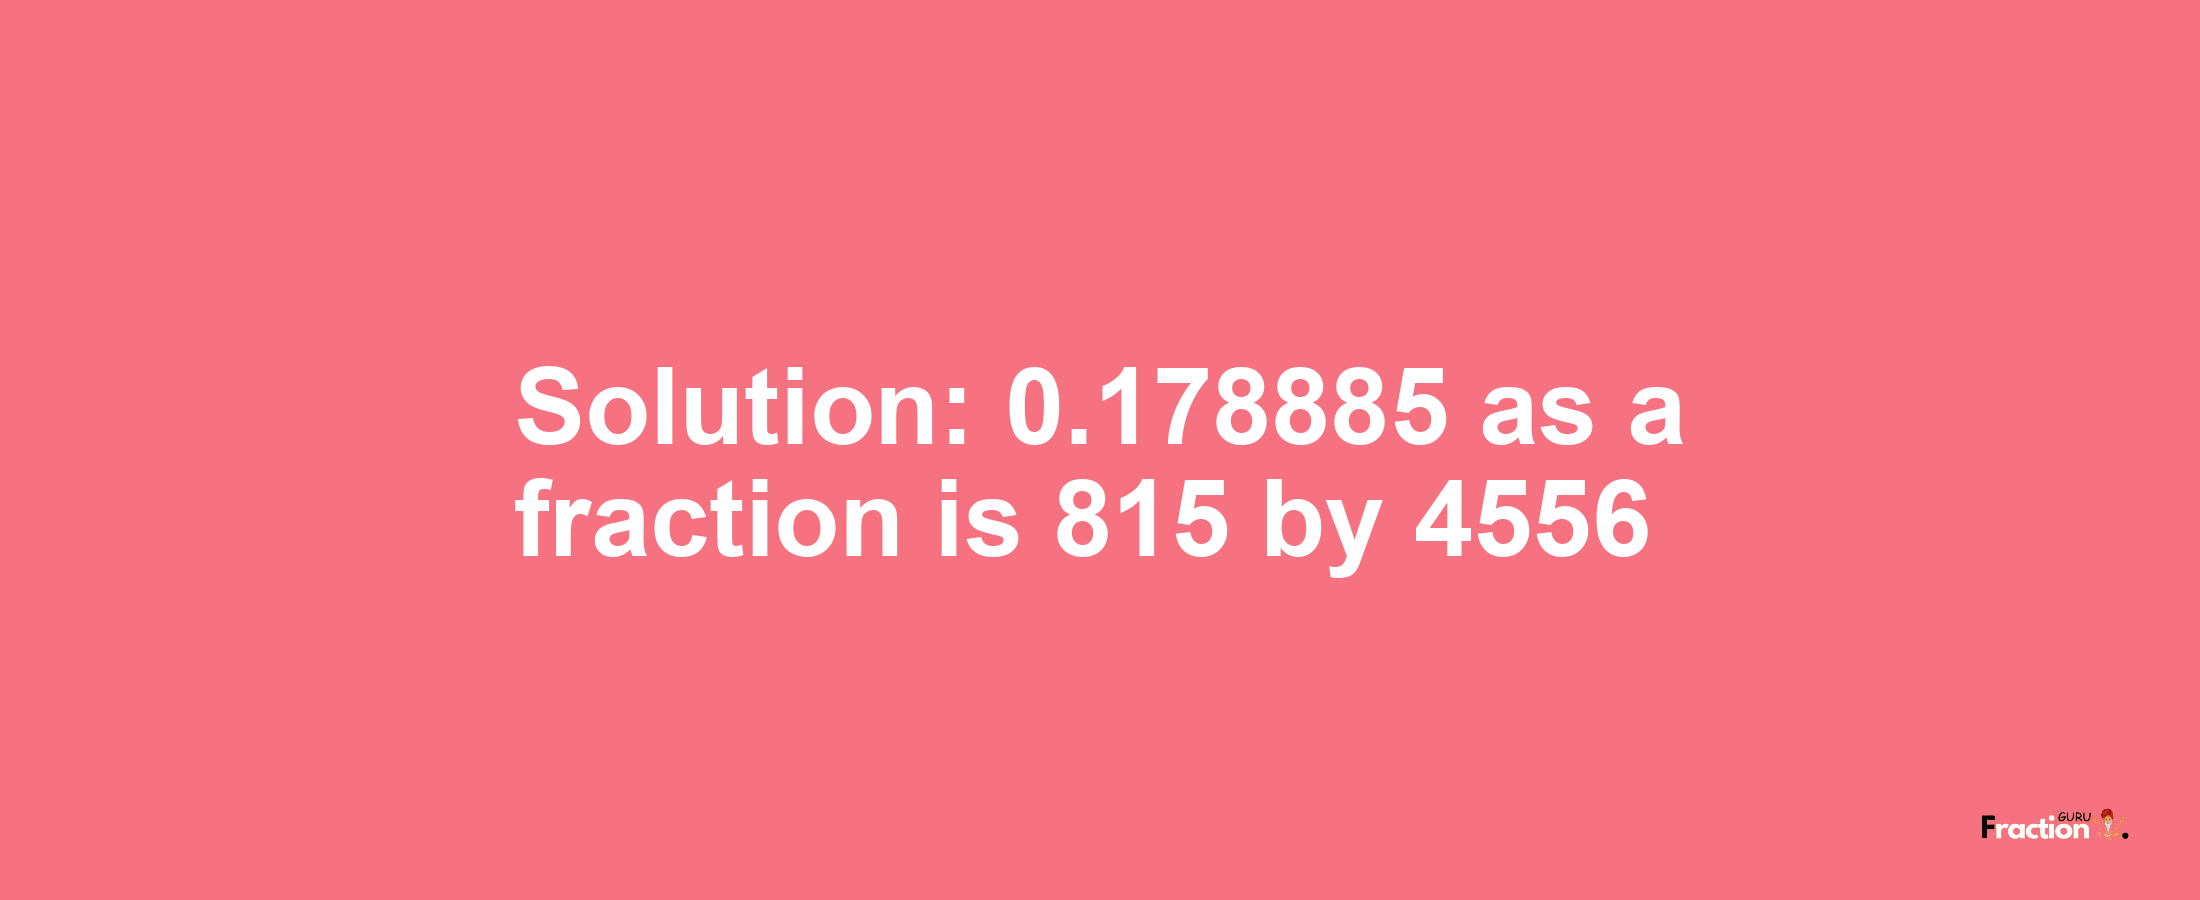 Solution:0.178885 as a fraction is 815/4556